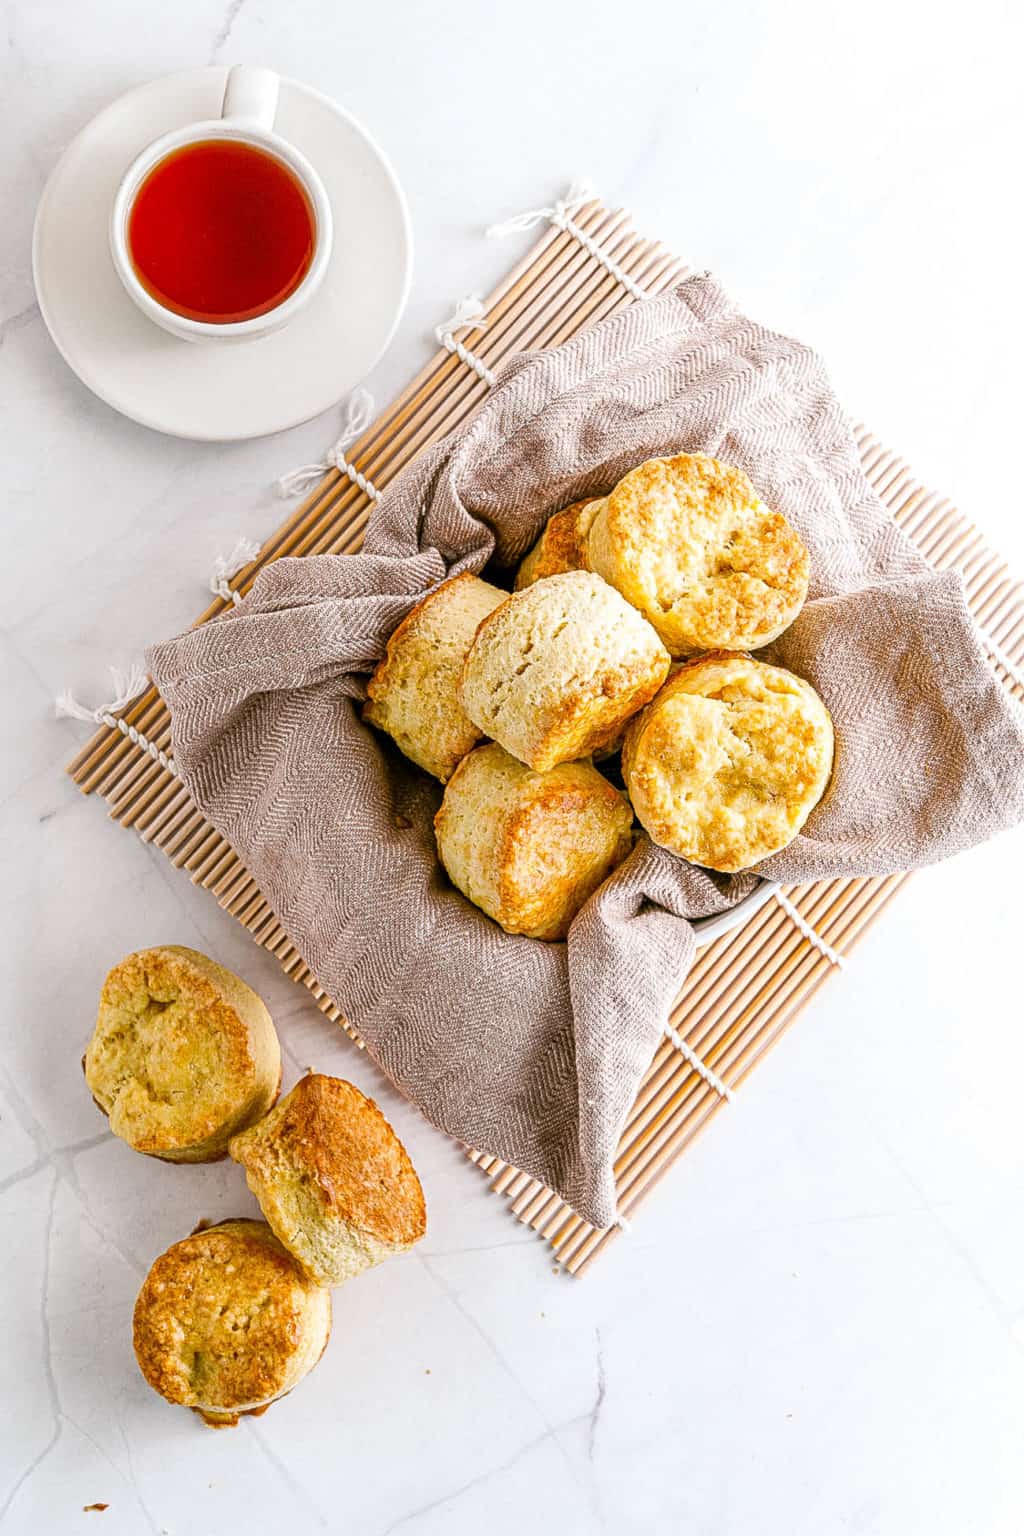 Easy Biscuit Recipe without Baking Powder (Homemade Biscuits!)